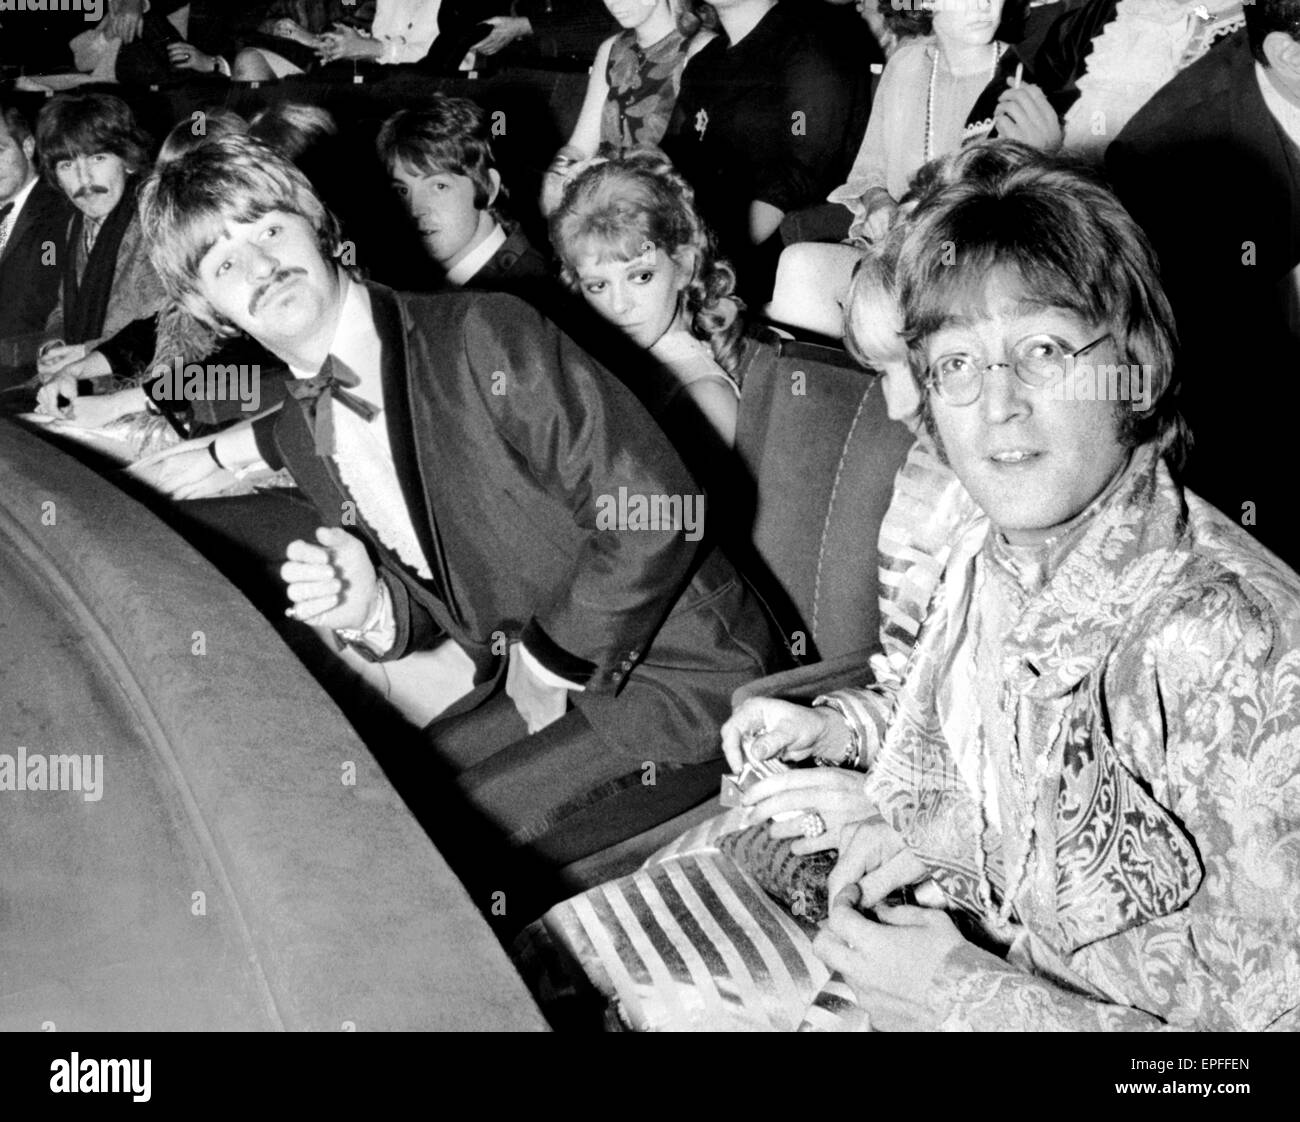 The Beatles attend Film Premiere of 'How I Won The War' at the London Pavilion, 18th October 1967. George Harrison. Paul McCartney. Ringo Starr and John Lennon. Stock Photo